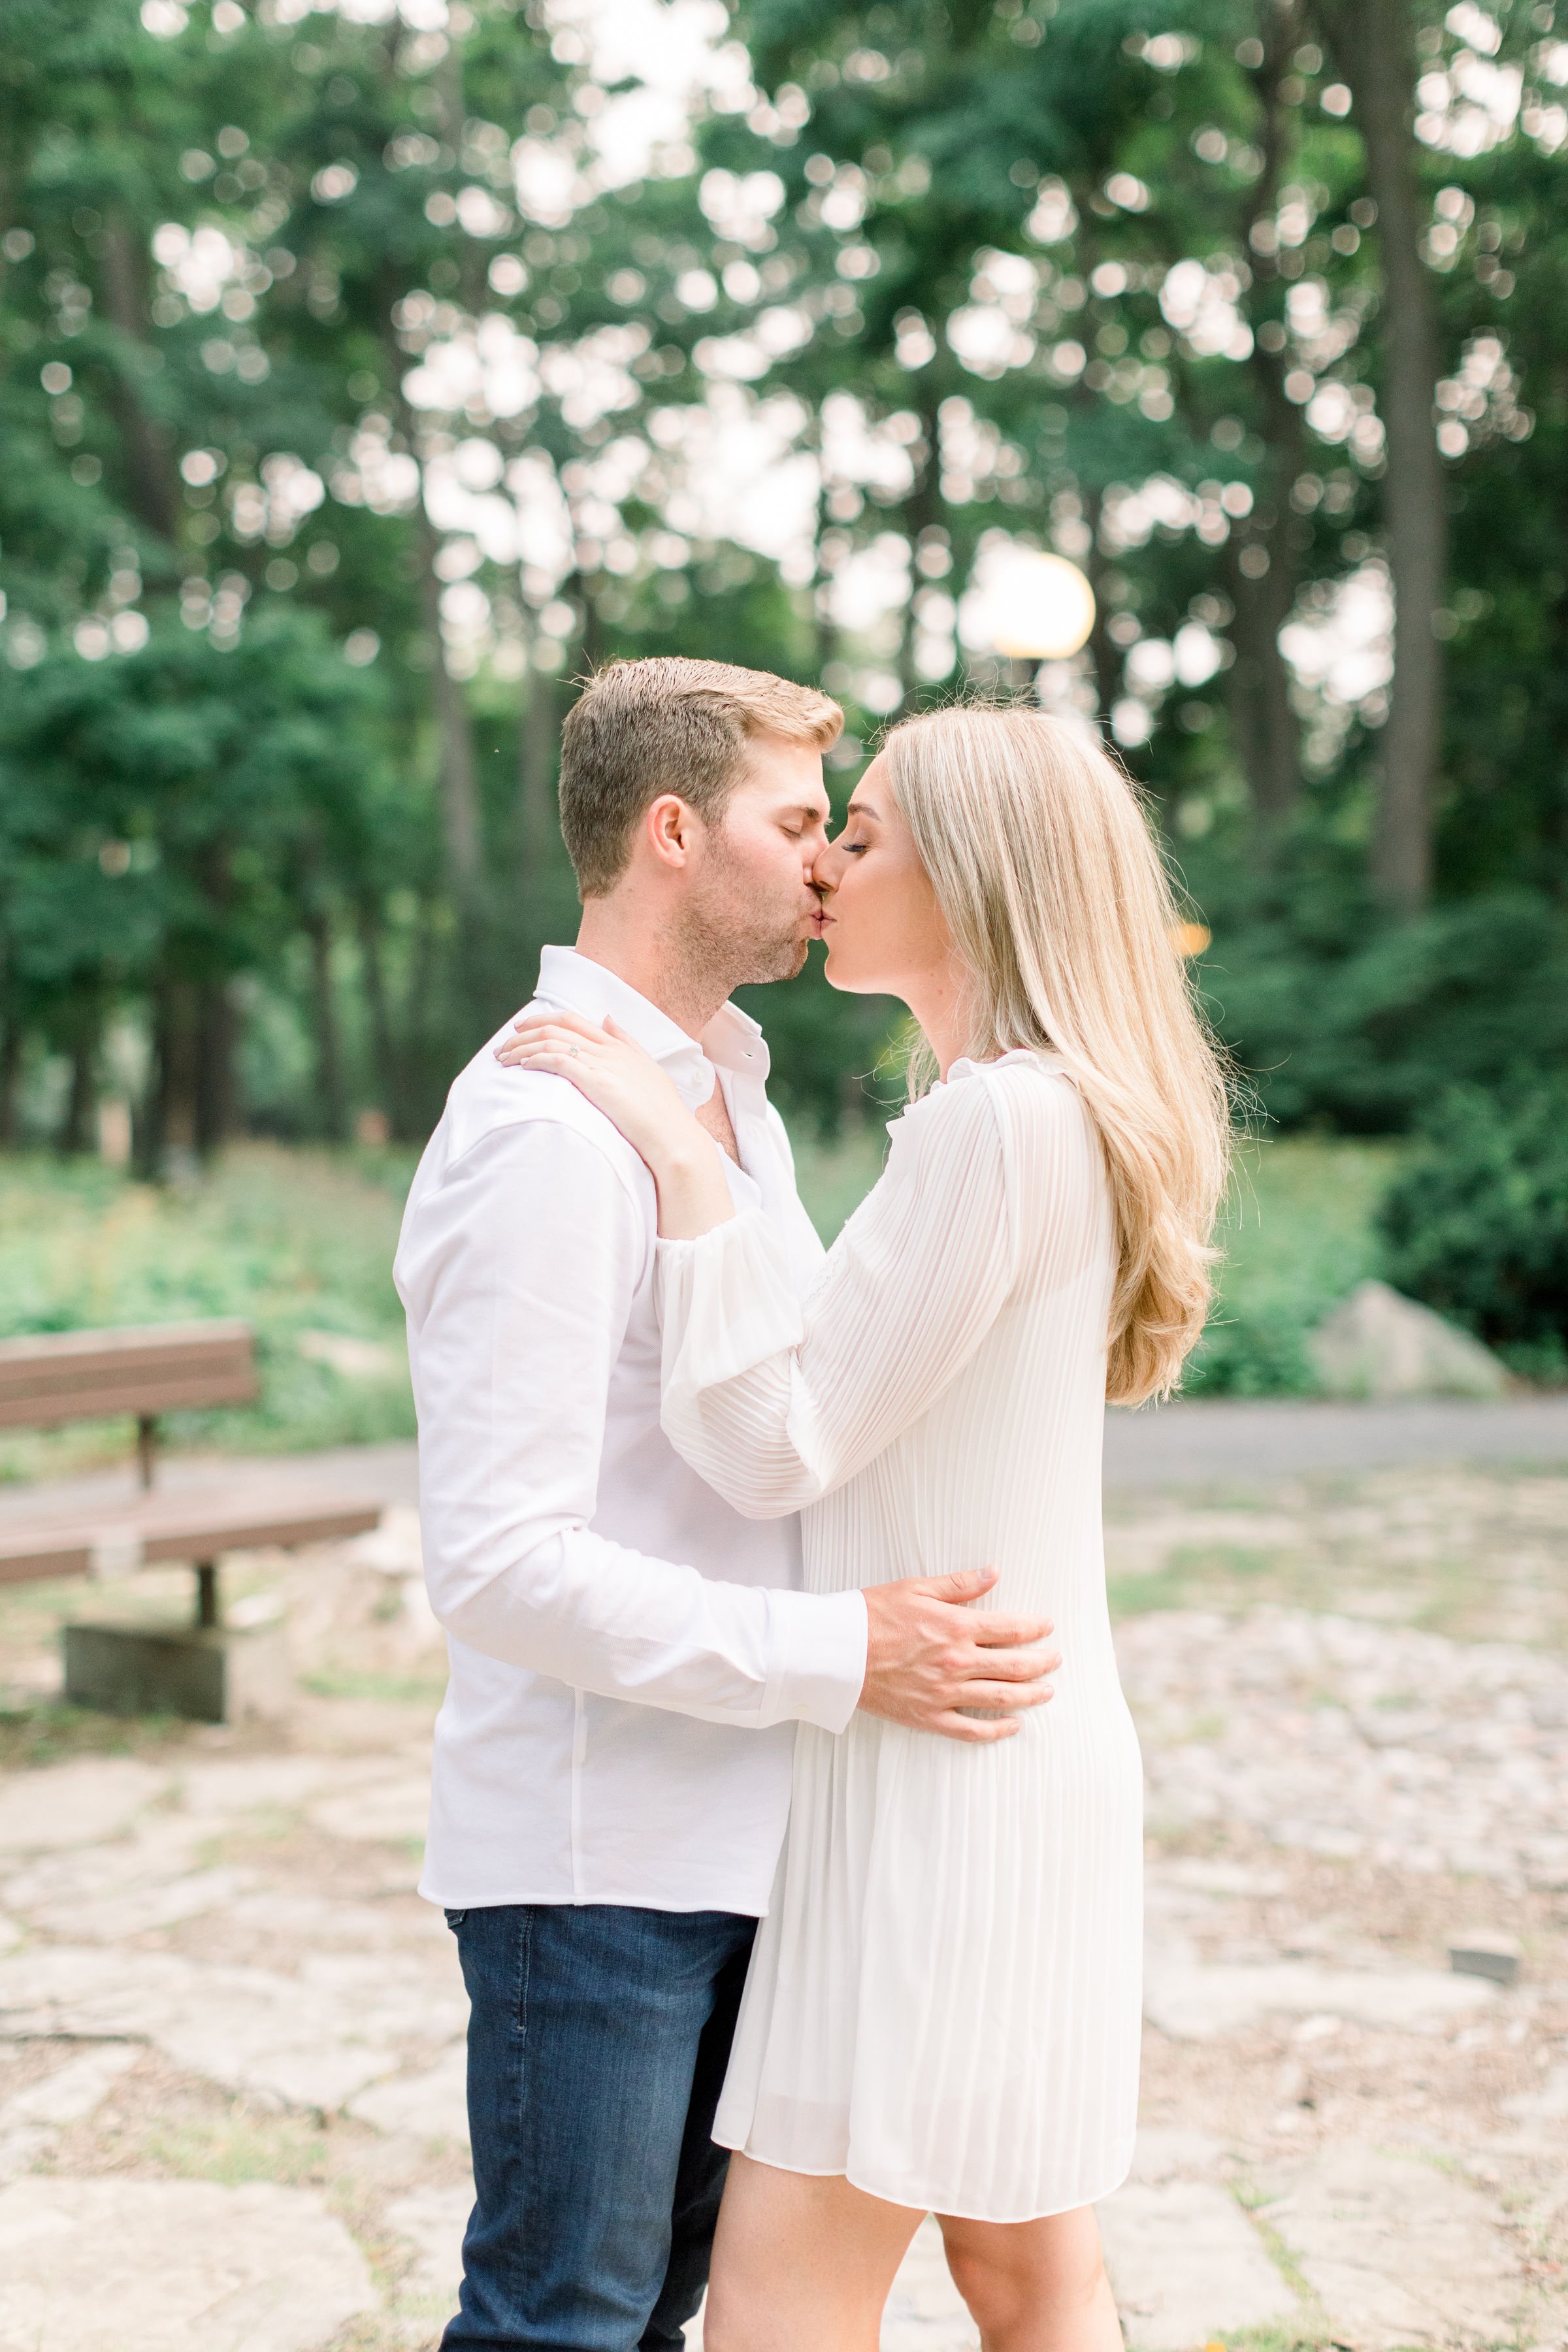  A blonde couple wearing an all-white kiss in a park plaza in Ottawa by Chelsea Mason Photography. couple goals summer wedding inspo #Ottawaengagements #Ottawaweddingphotographers #engagementwithdogs #ChelseaMasonPhotography #ChelseaMasonEngagements 